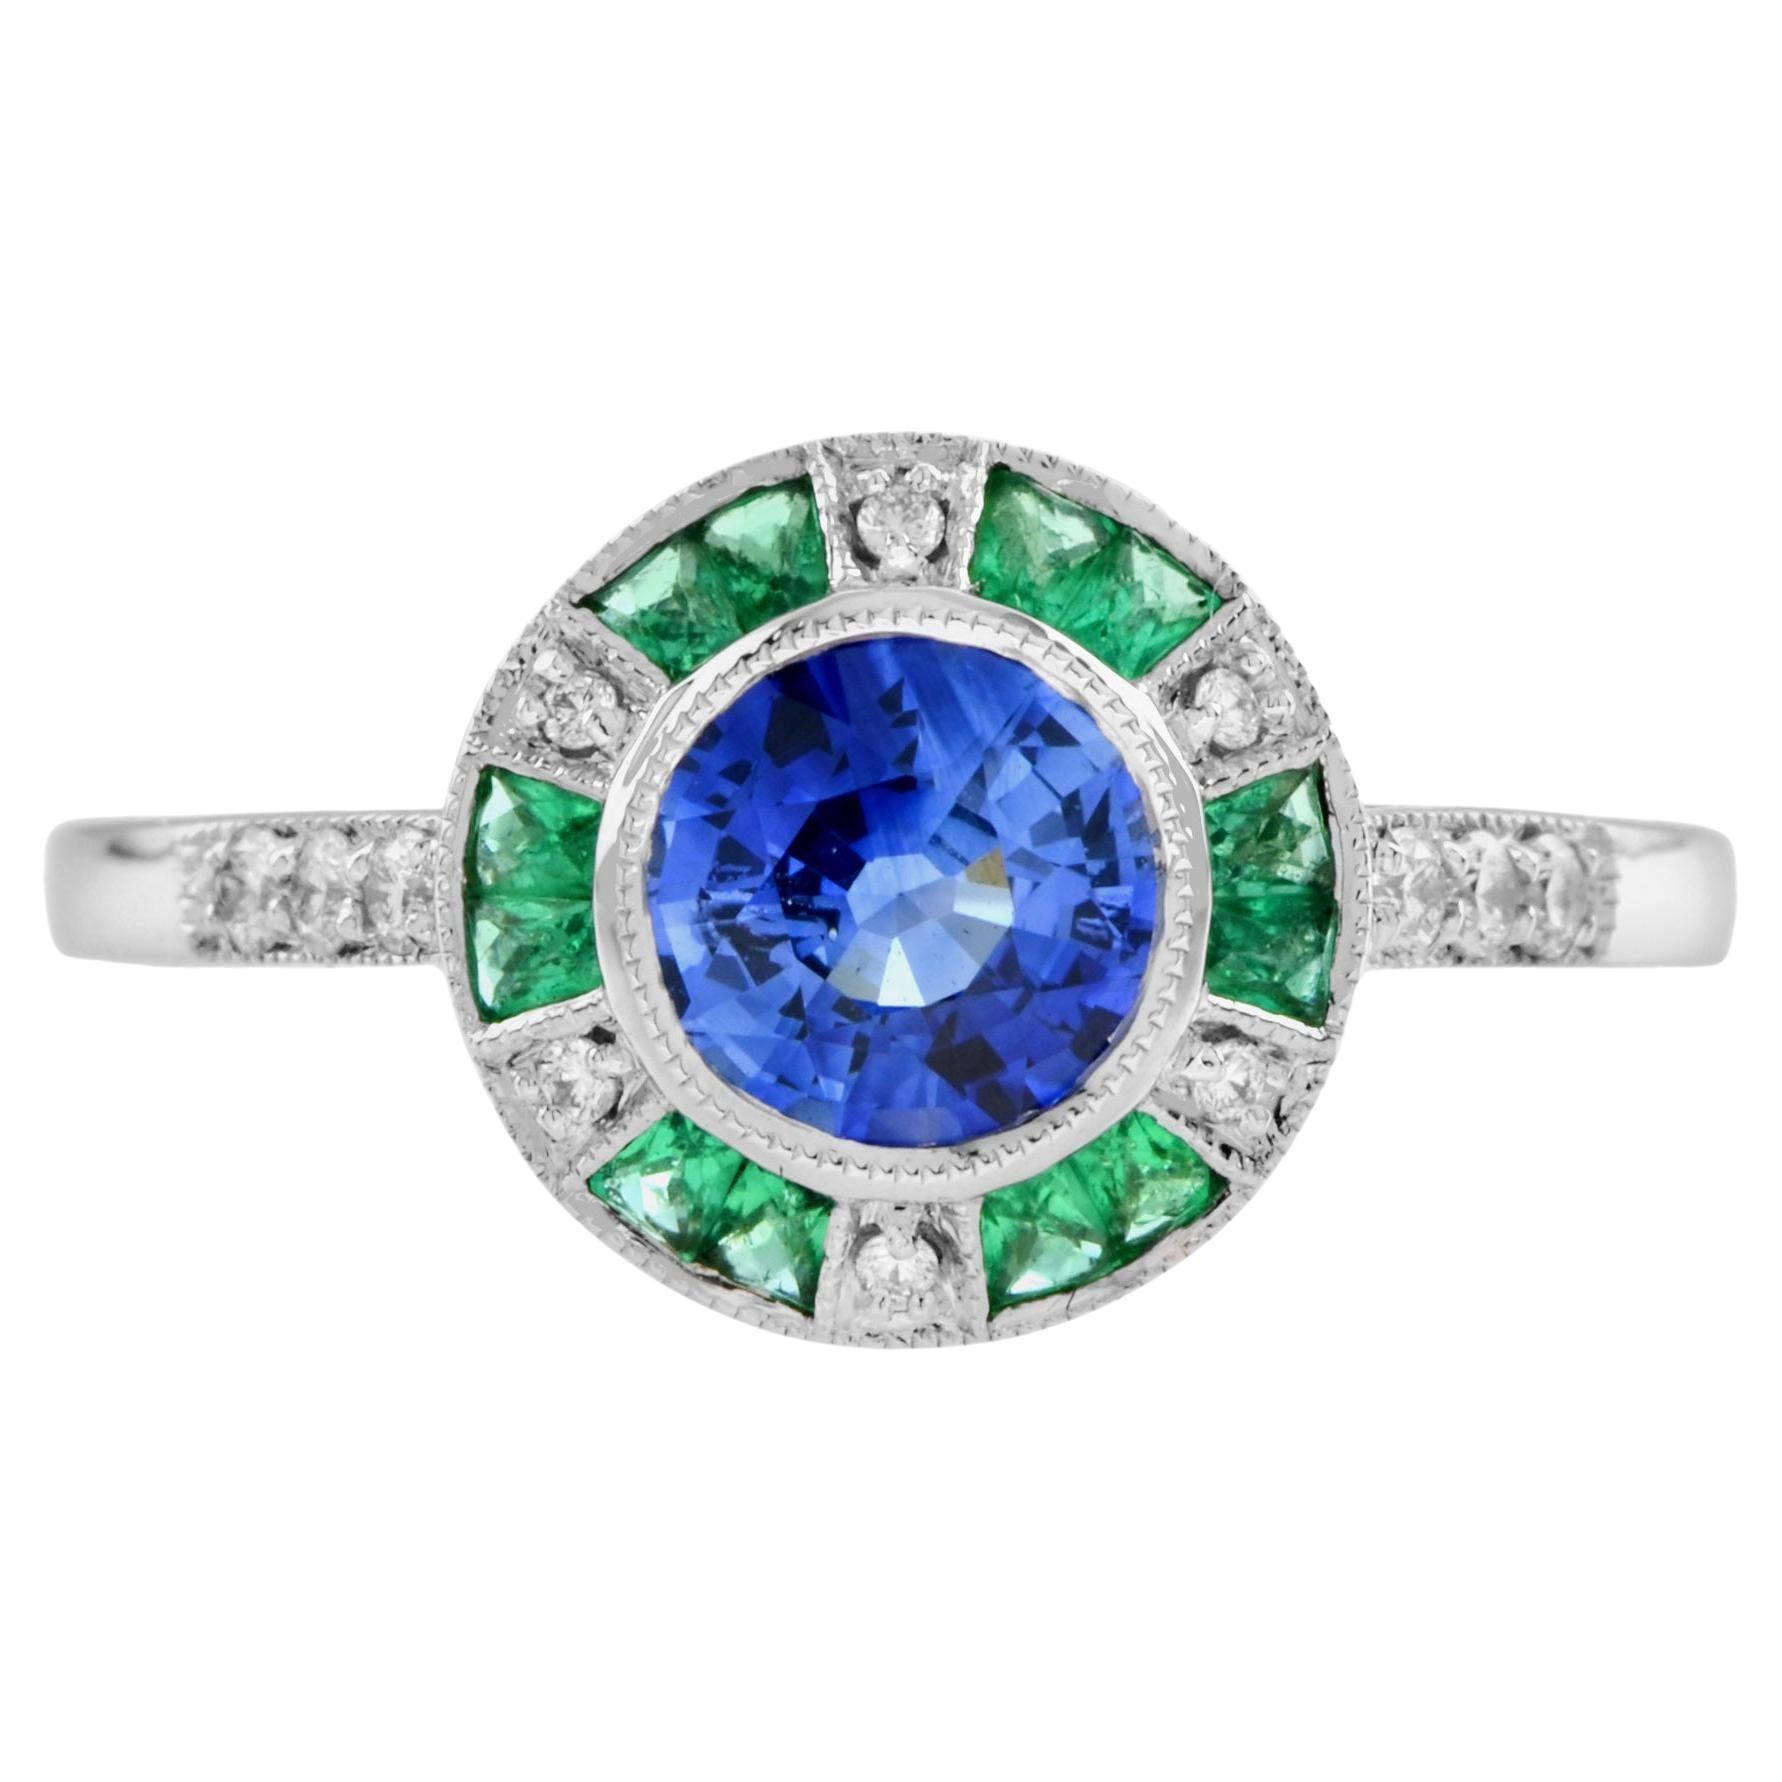 Ceylon Sapphire with Emerald Diamond Target Engagement Ring in 18k White Gold